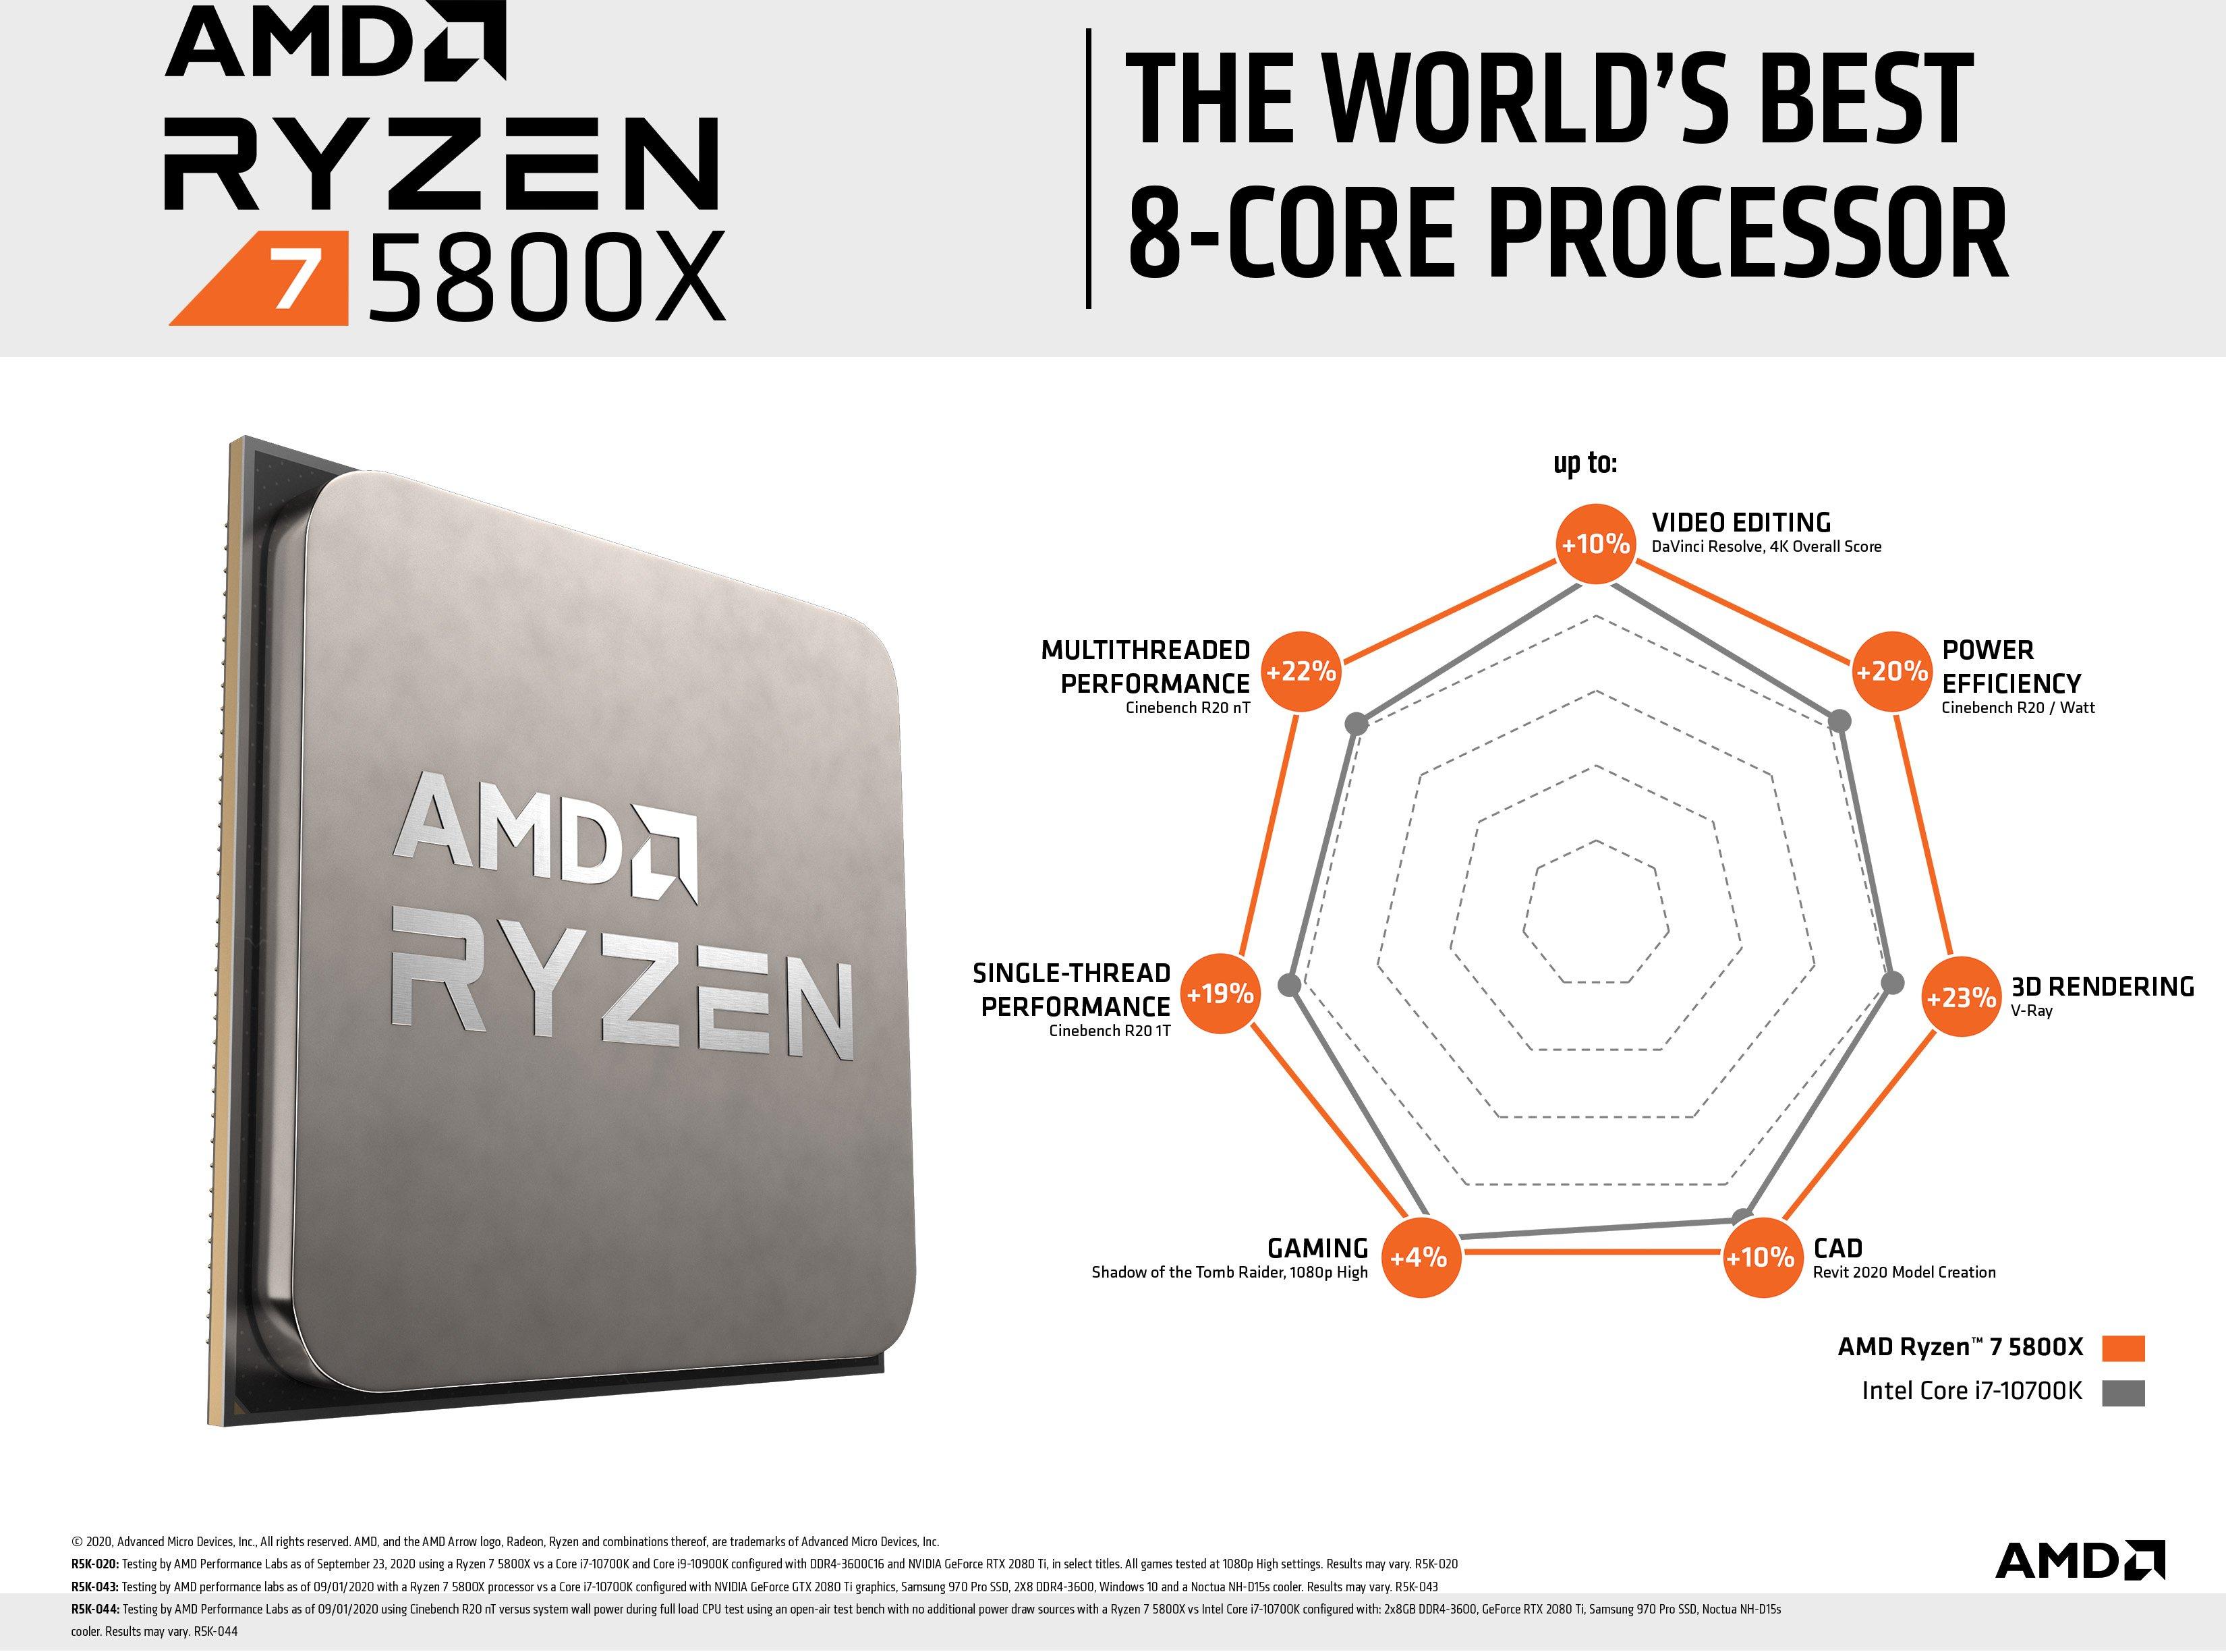 Test of the AMD CPU with the biggest price drop, the Ryzen 7 5800X 